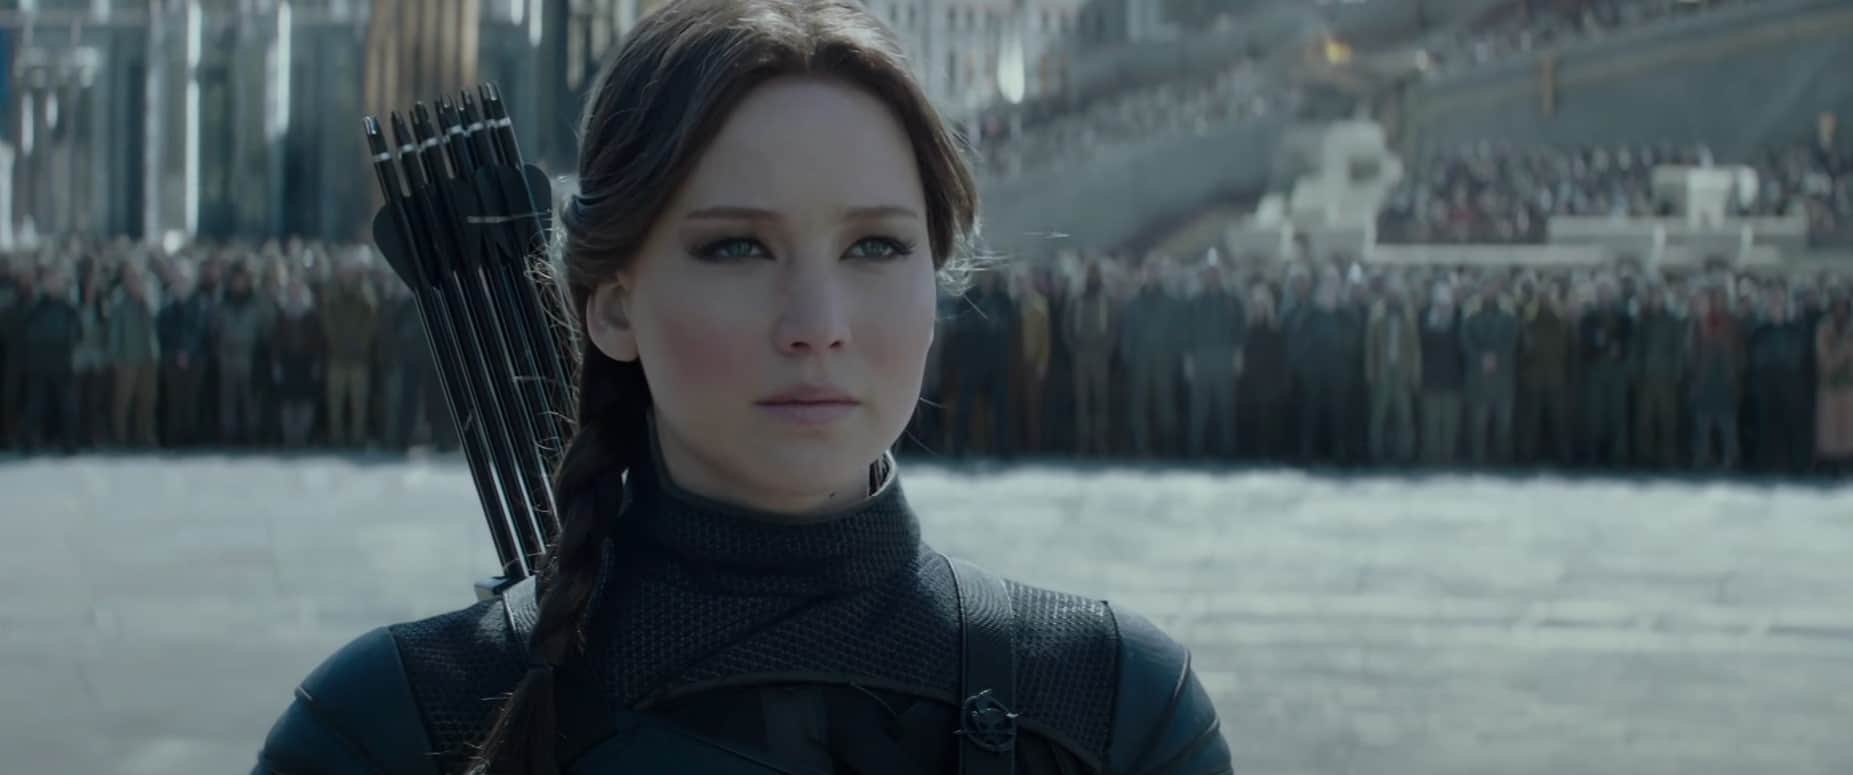 Why Did Katniss Kill President Coin?